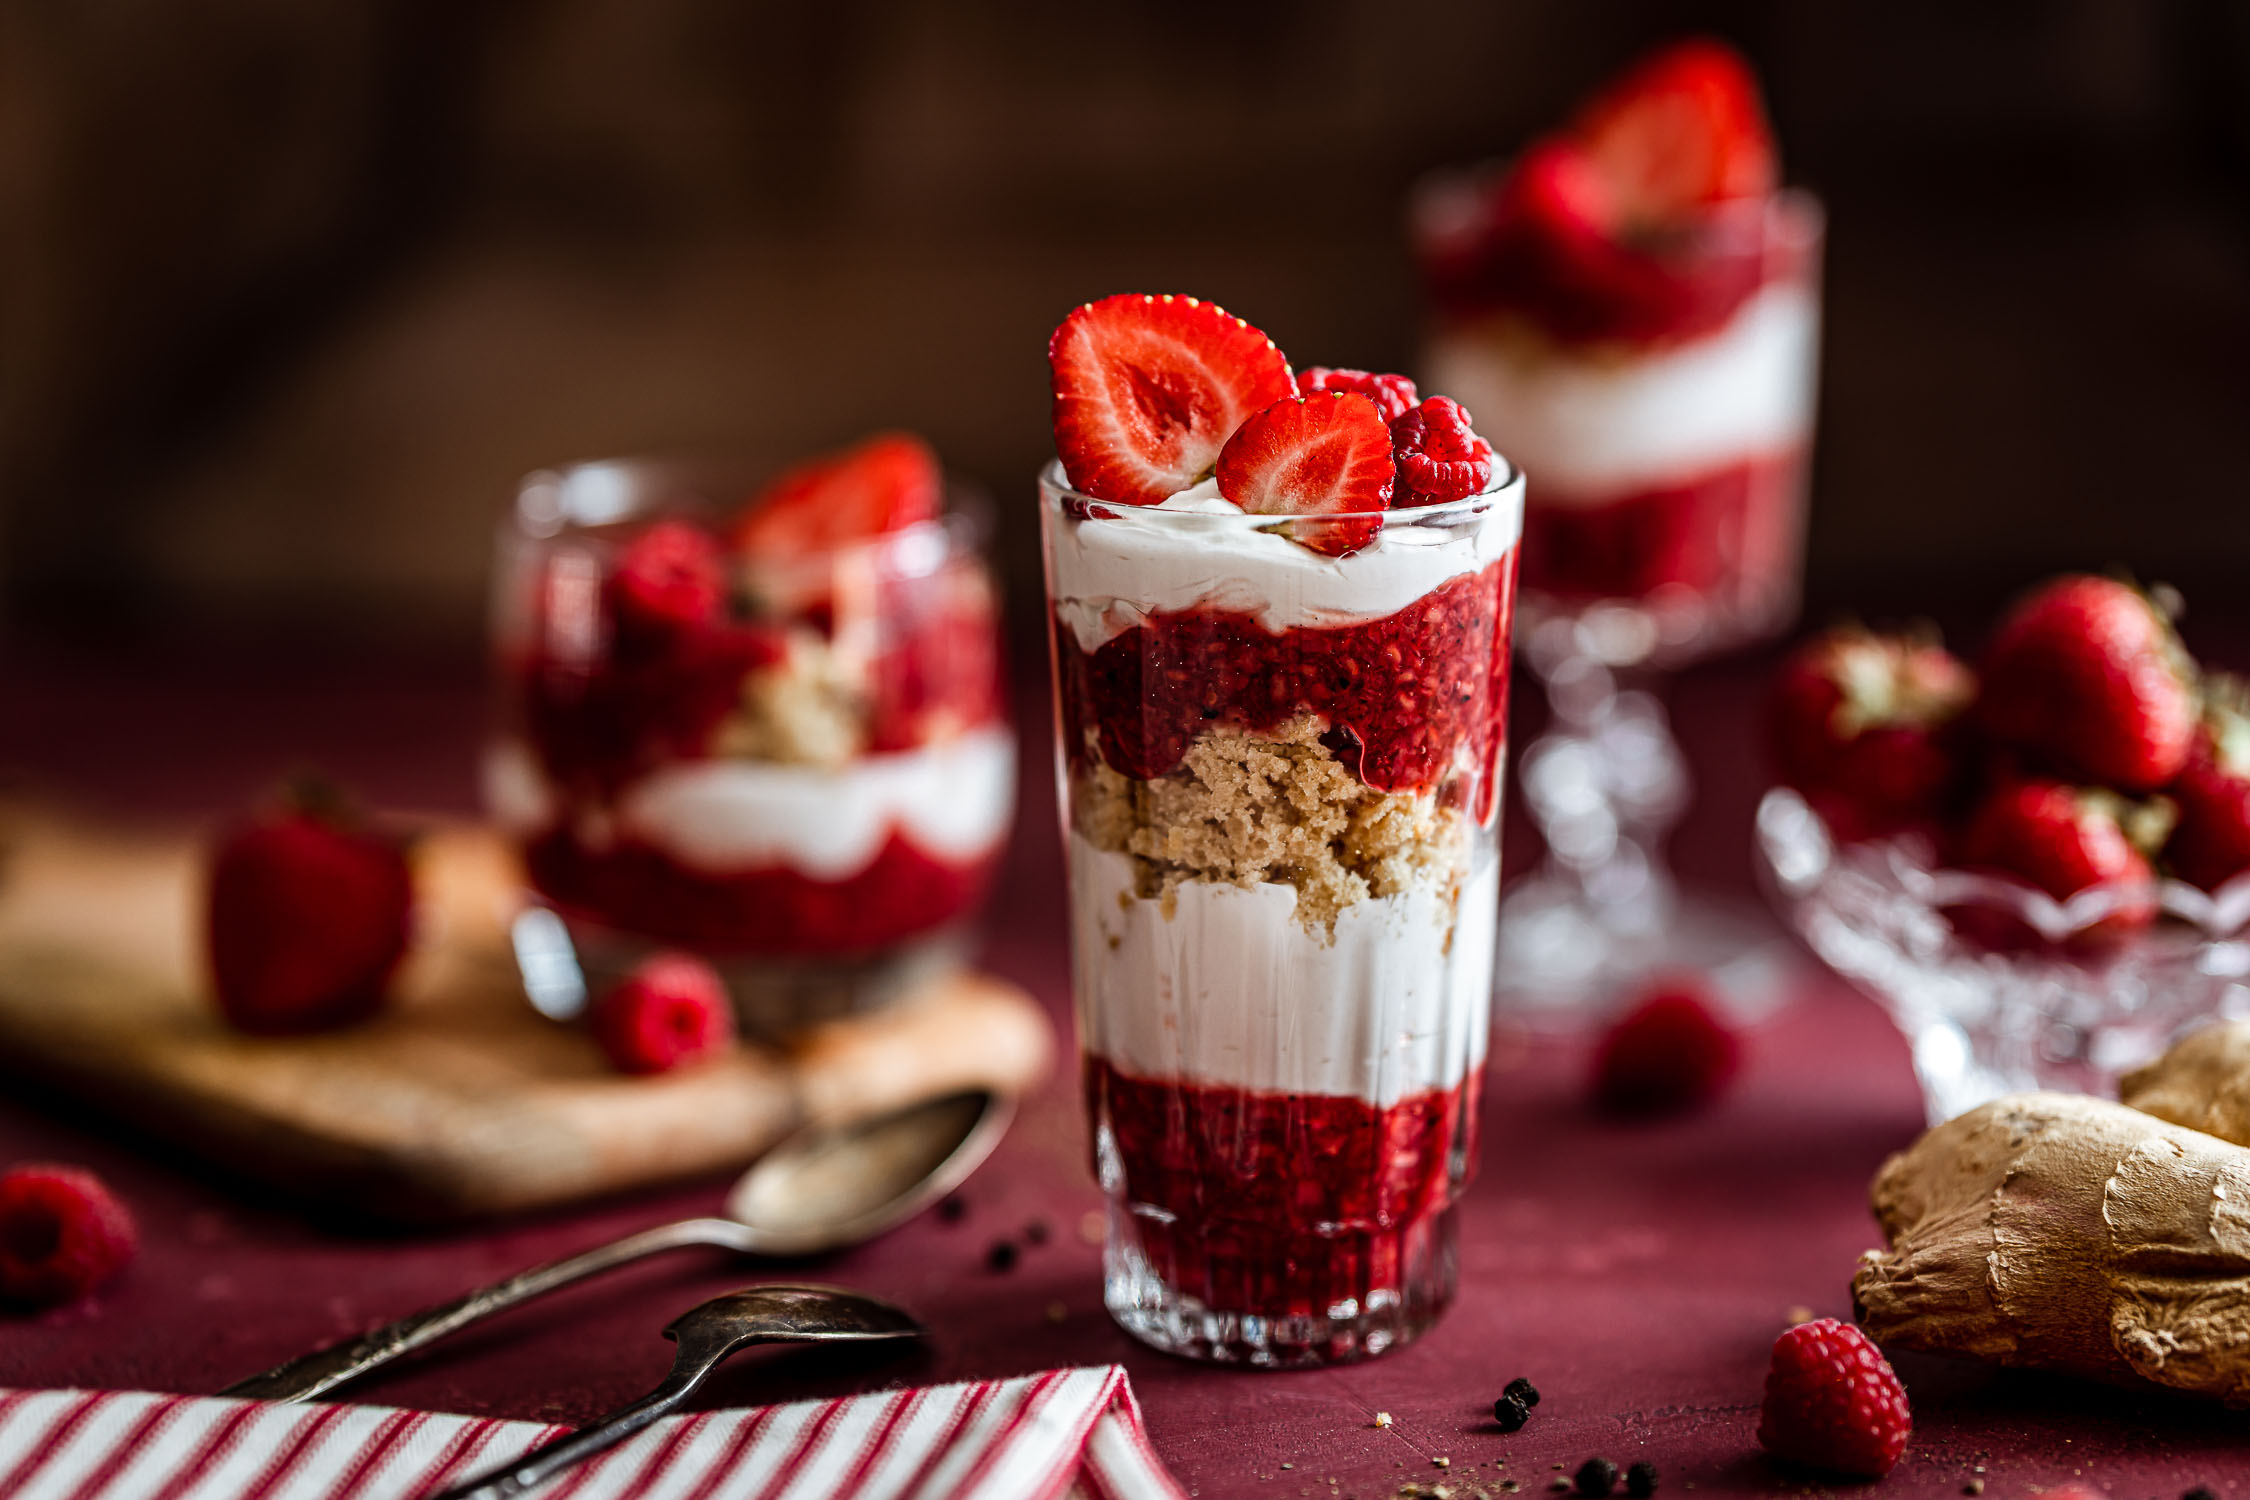 Spicy Berry Trifle in a glass